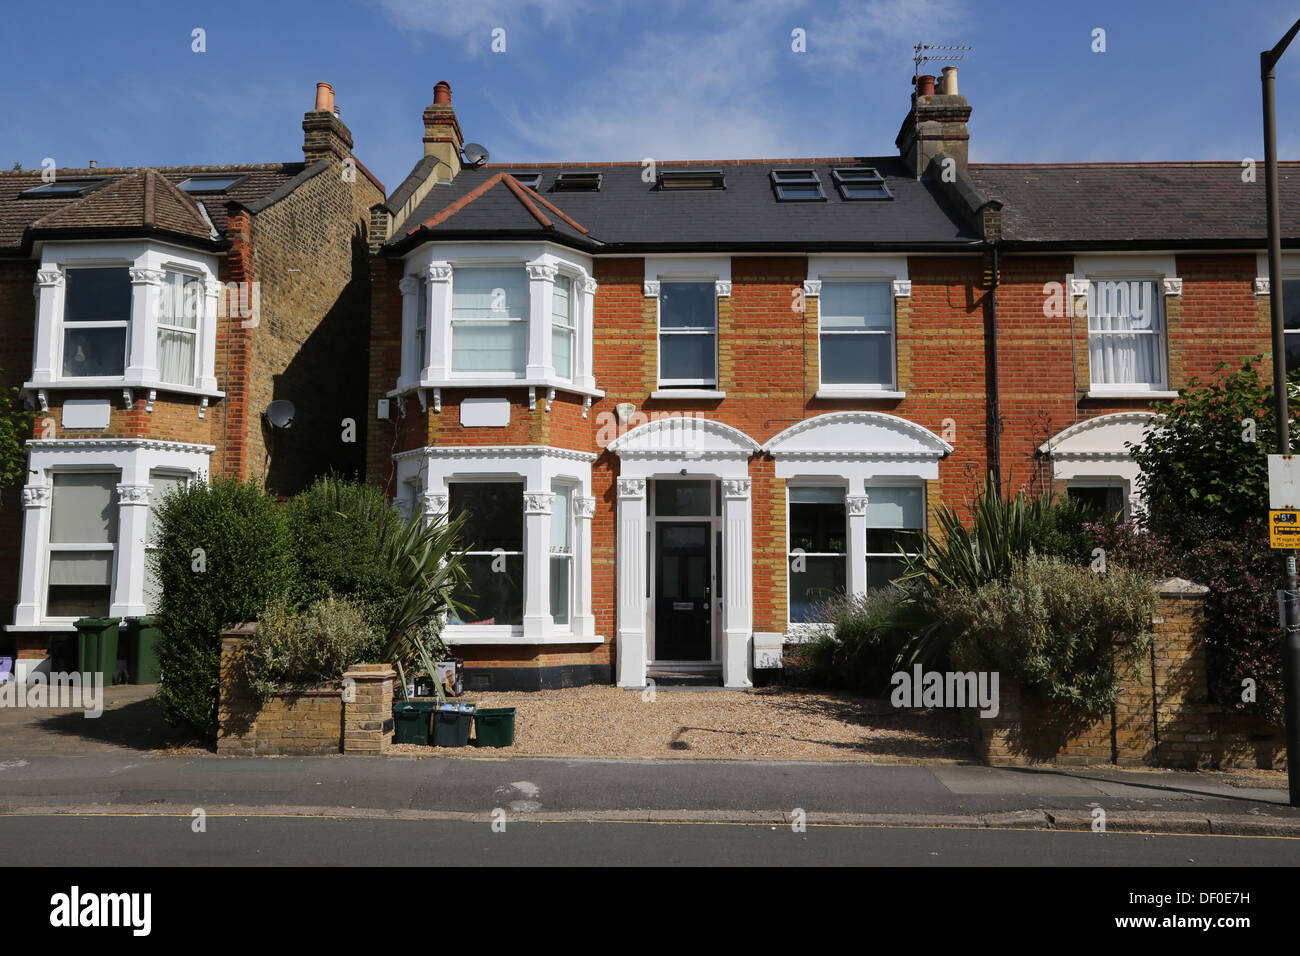 Wimbledon London England Semi-Detached Houses With Recycle Bins In Front Garden Stock Photo